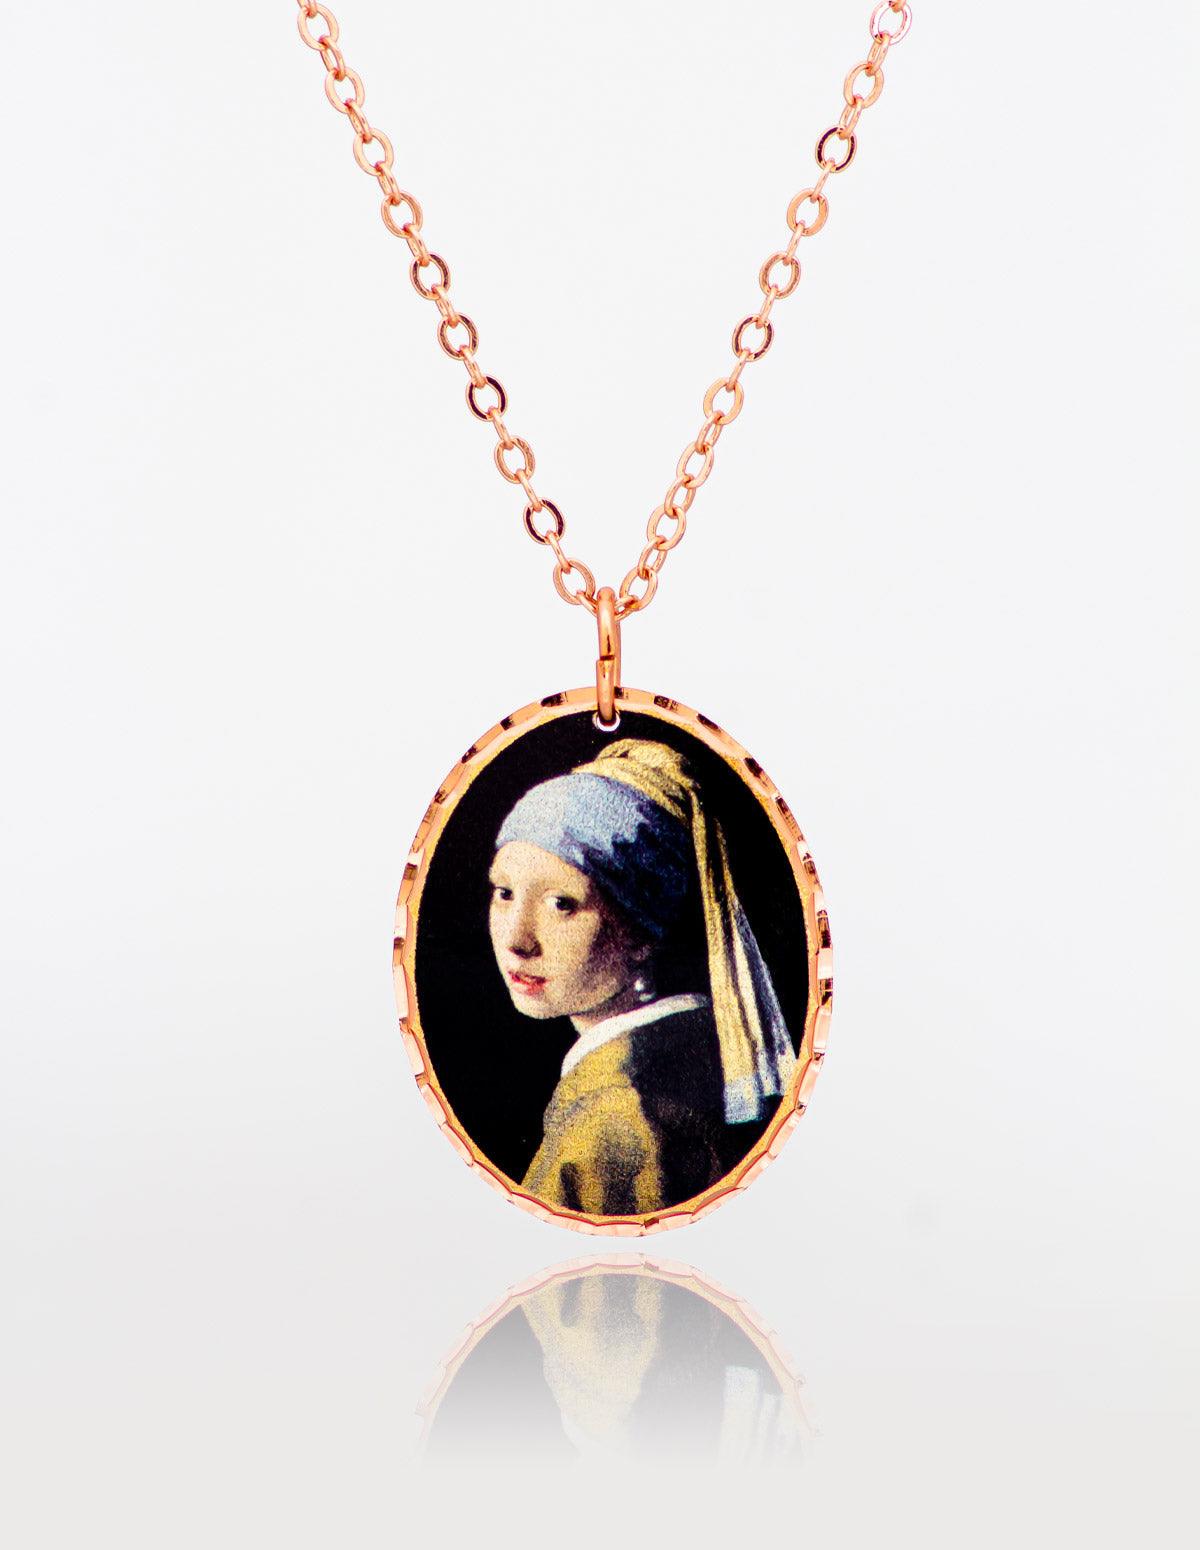 Johannes Vermeer Girl with a Pearl Earring Necklace - artucky-US - Girl with a Pearl Earring, import_2022_07_19_113509, Johannes Vermeer, kolye, Pearl Earring, tasarım kolye